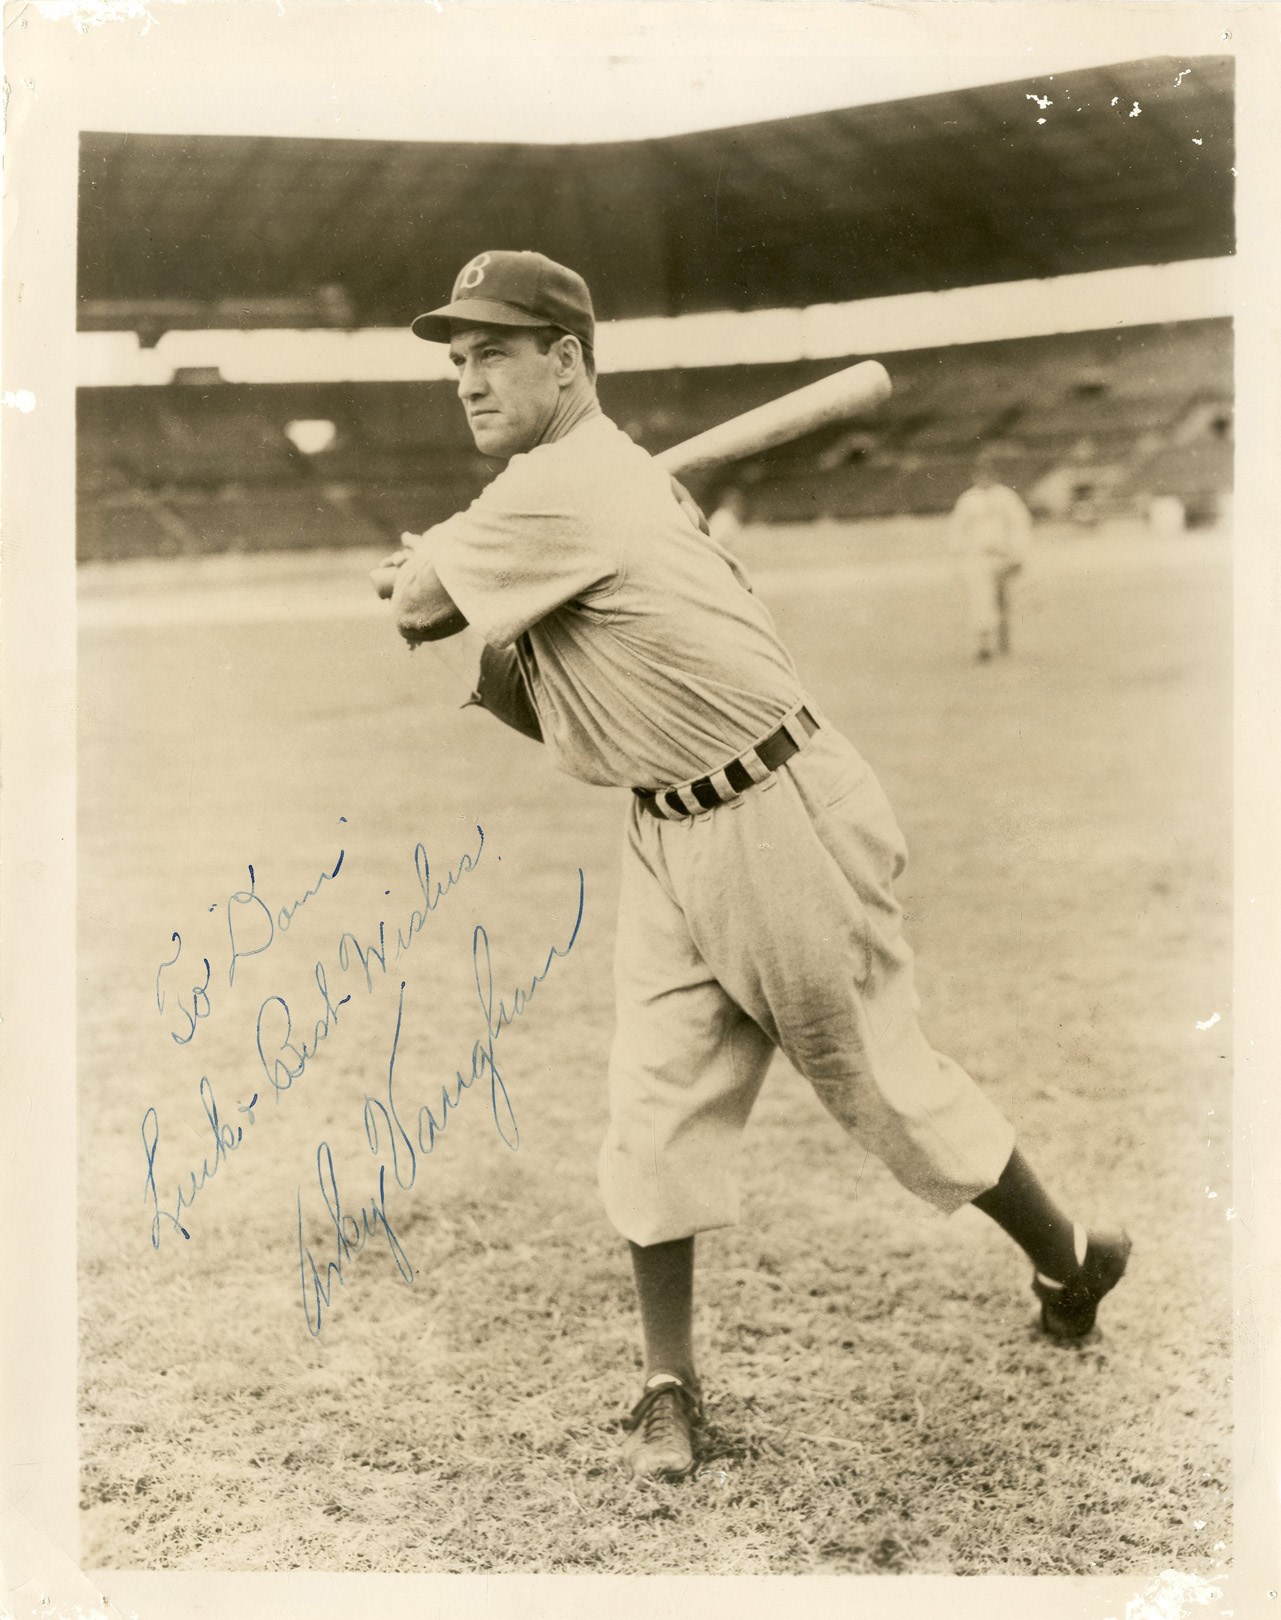 - 1940s Arky Vaughn Signed Photograph to Dom DiMaggio (JSA)